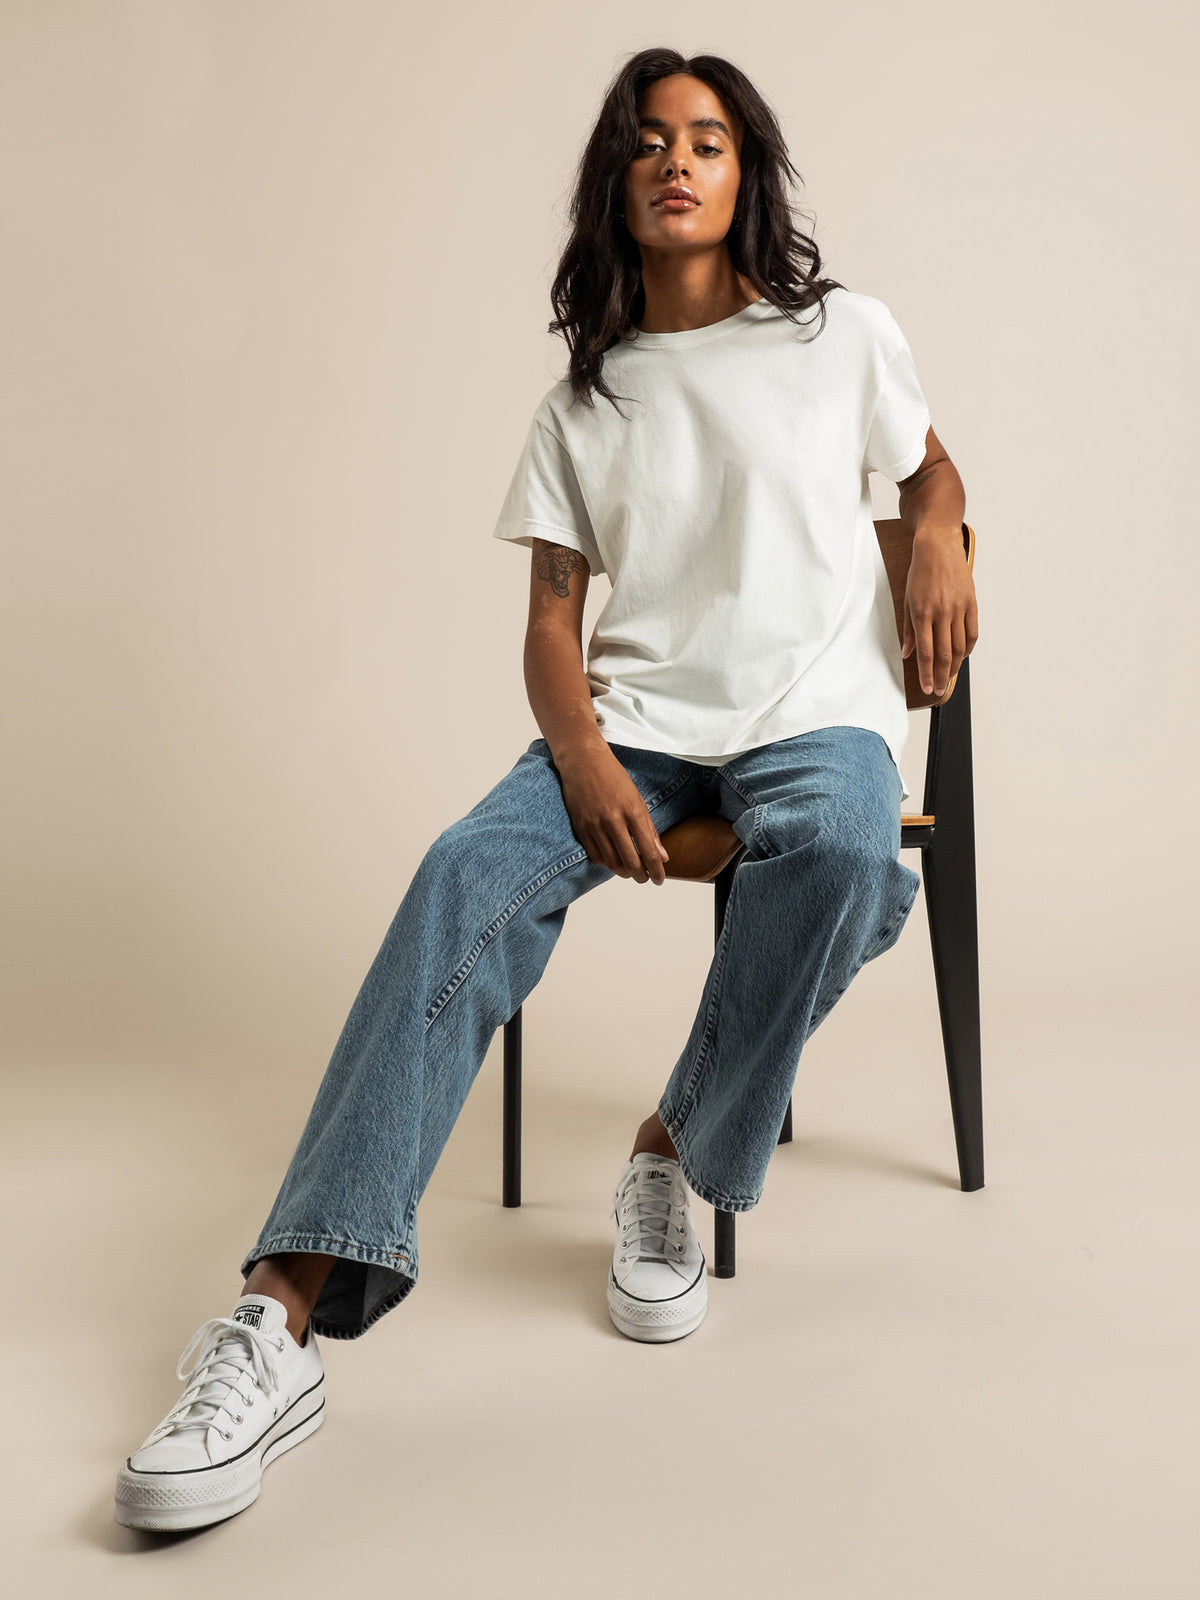 Tina T-Shirt in Off White